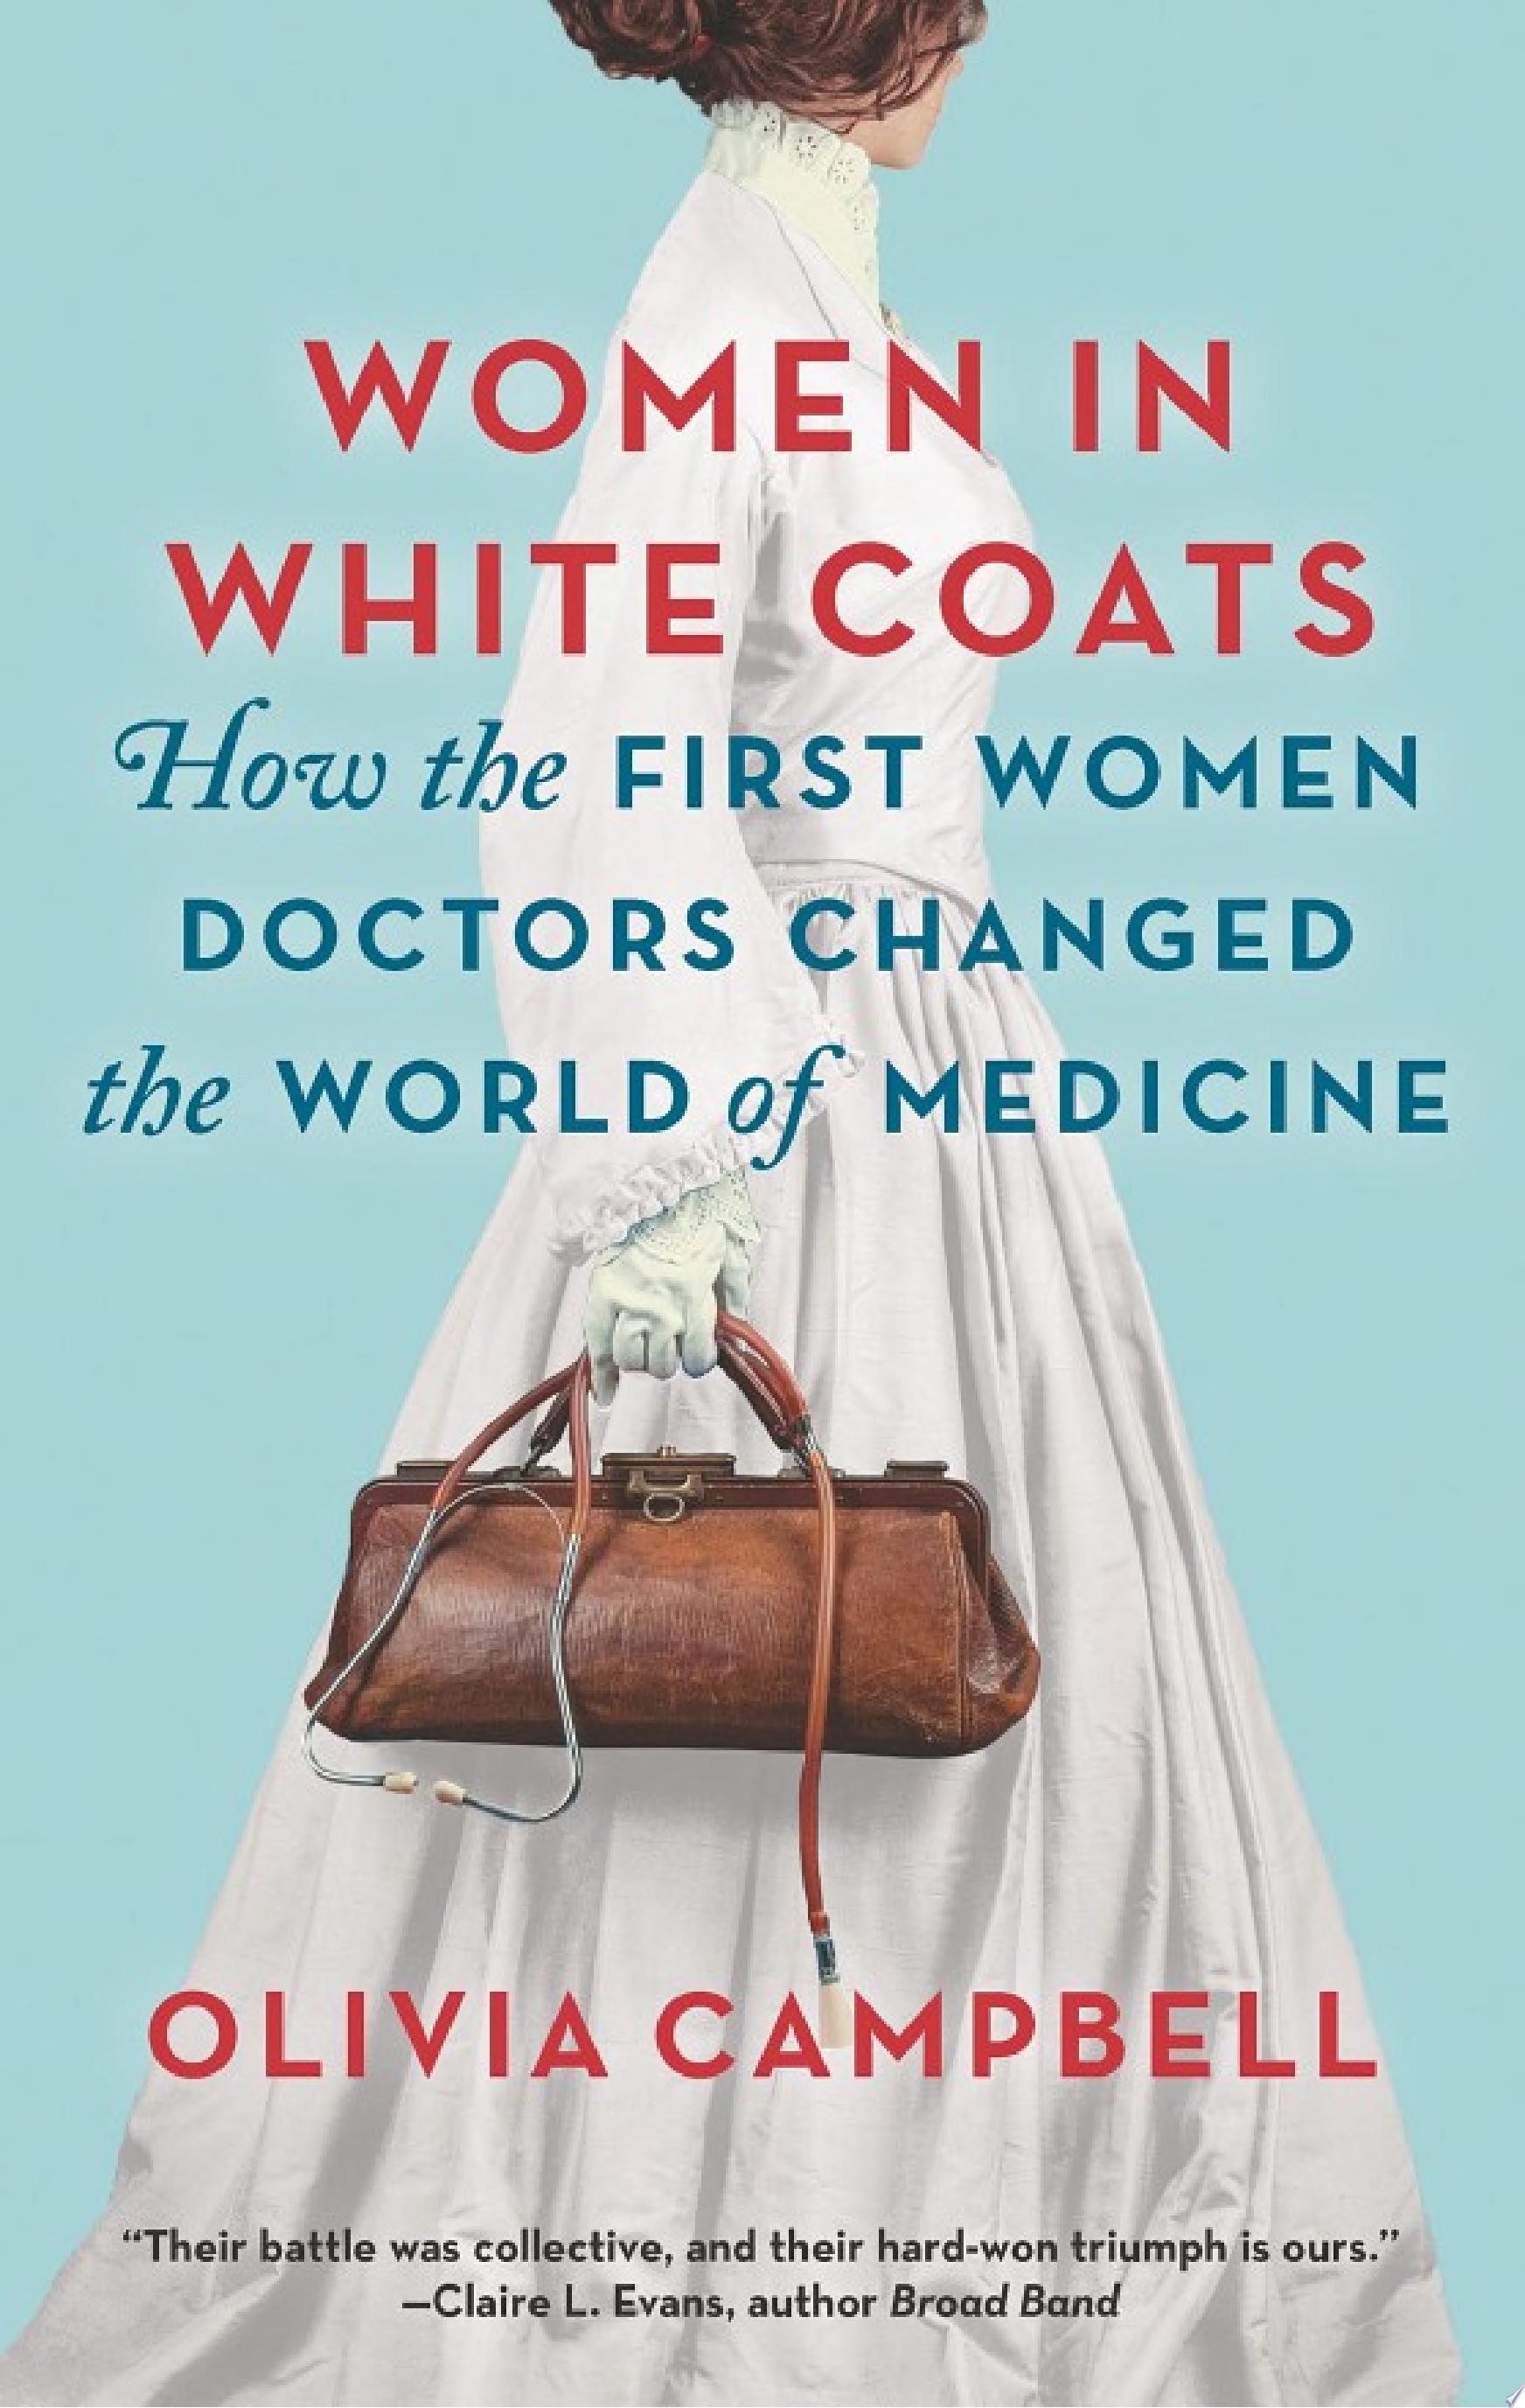 Image for "Women in White Coats"